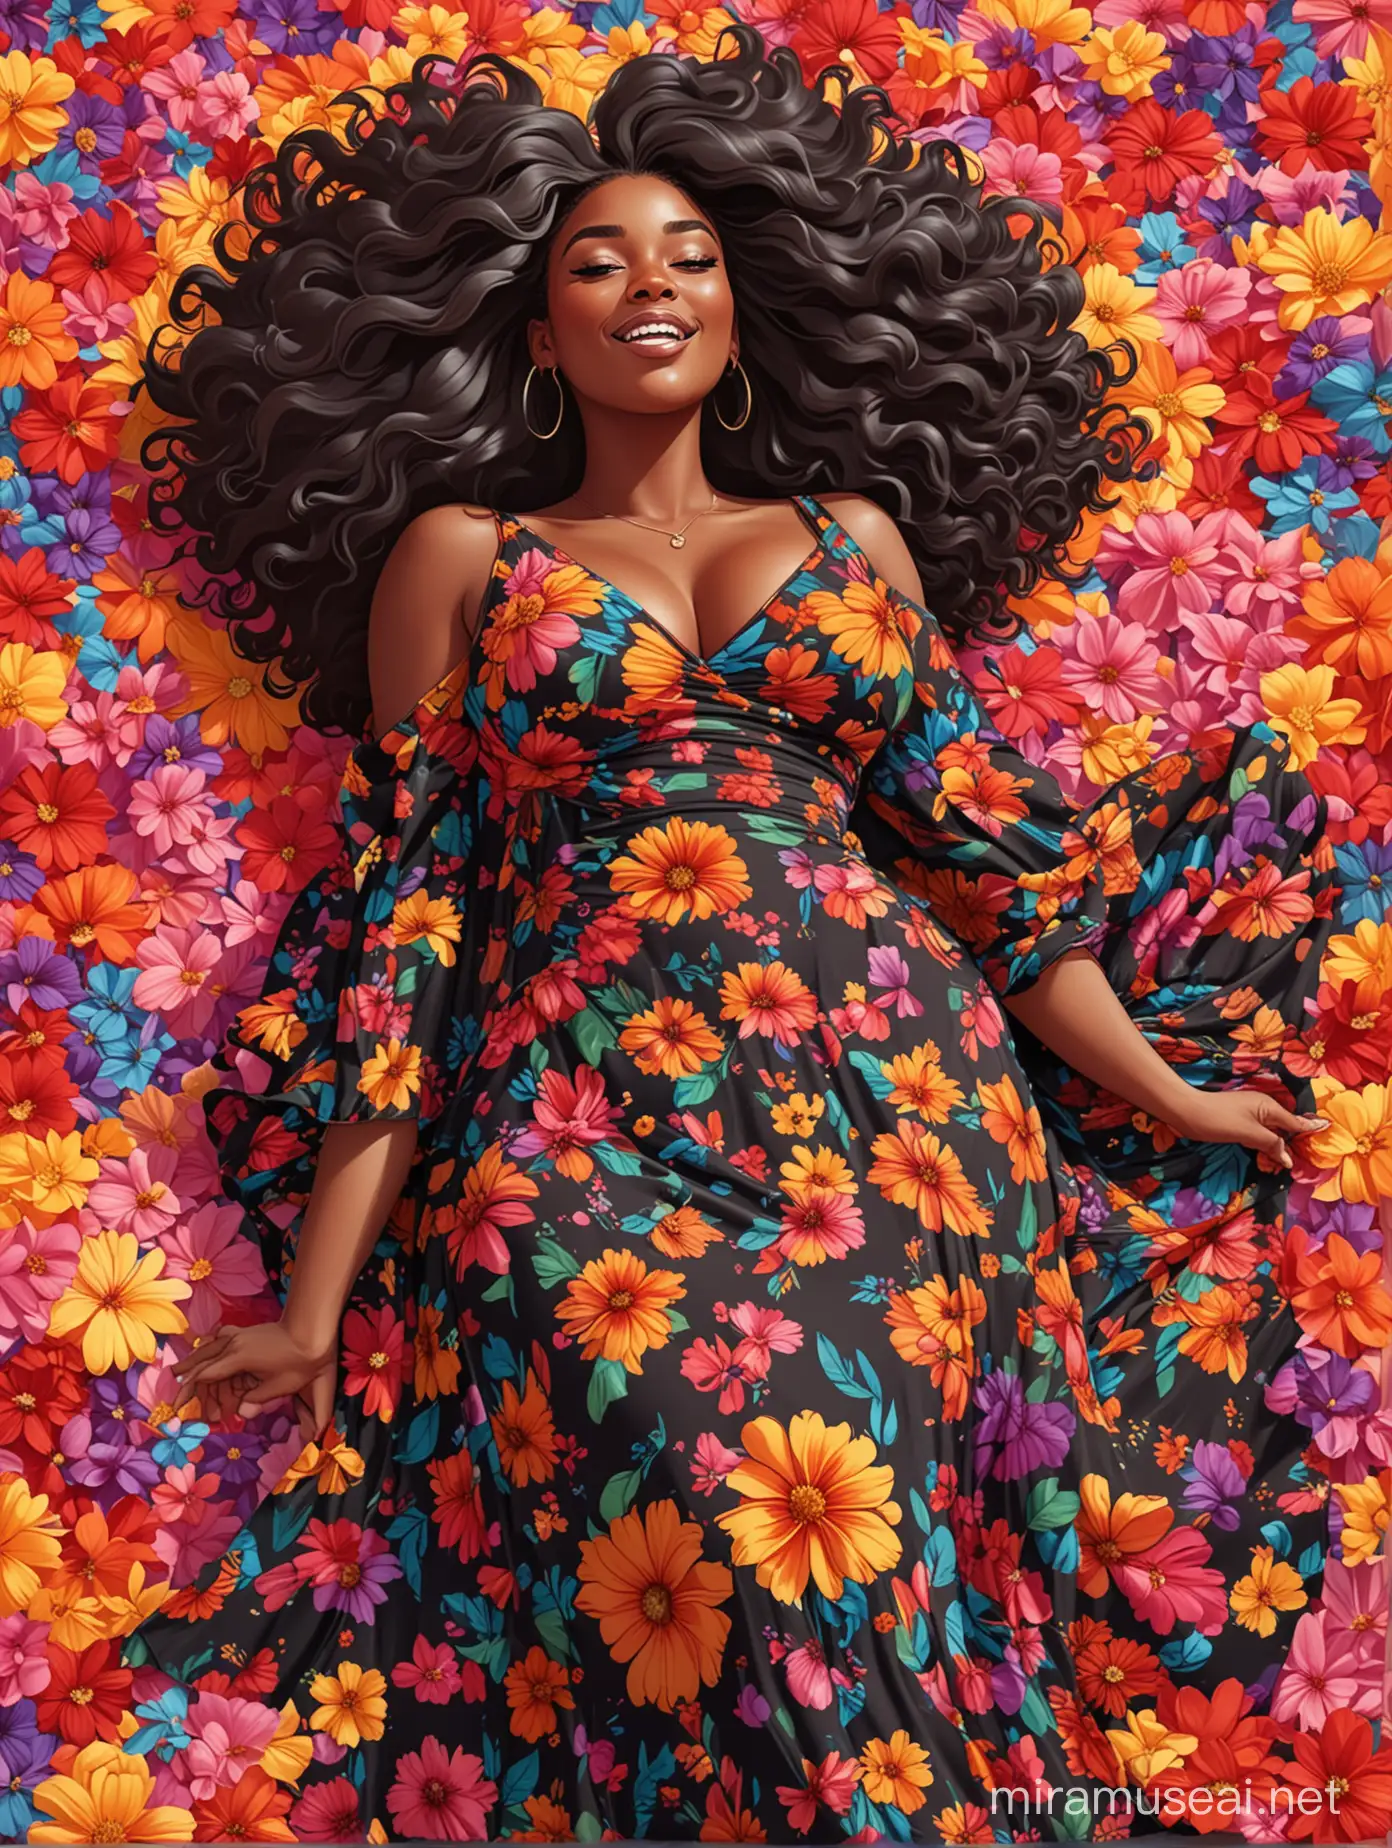 A sassy thick-lined vibrant cartoon art style cartoon black female lounging lazily on her side, surrounded by colorful large flower petals. her curvy body silhouette a black maxi dress. Looking up coyly, she grins widely, showing teeth. Her poofy hair forms a mane framing her confident, regal expression.